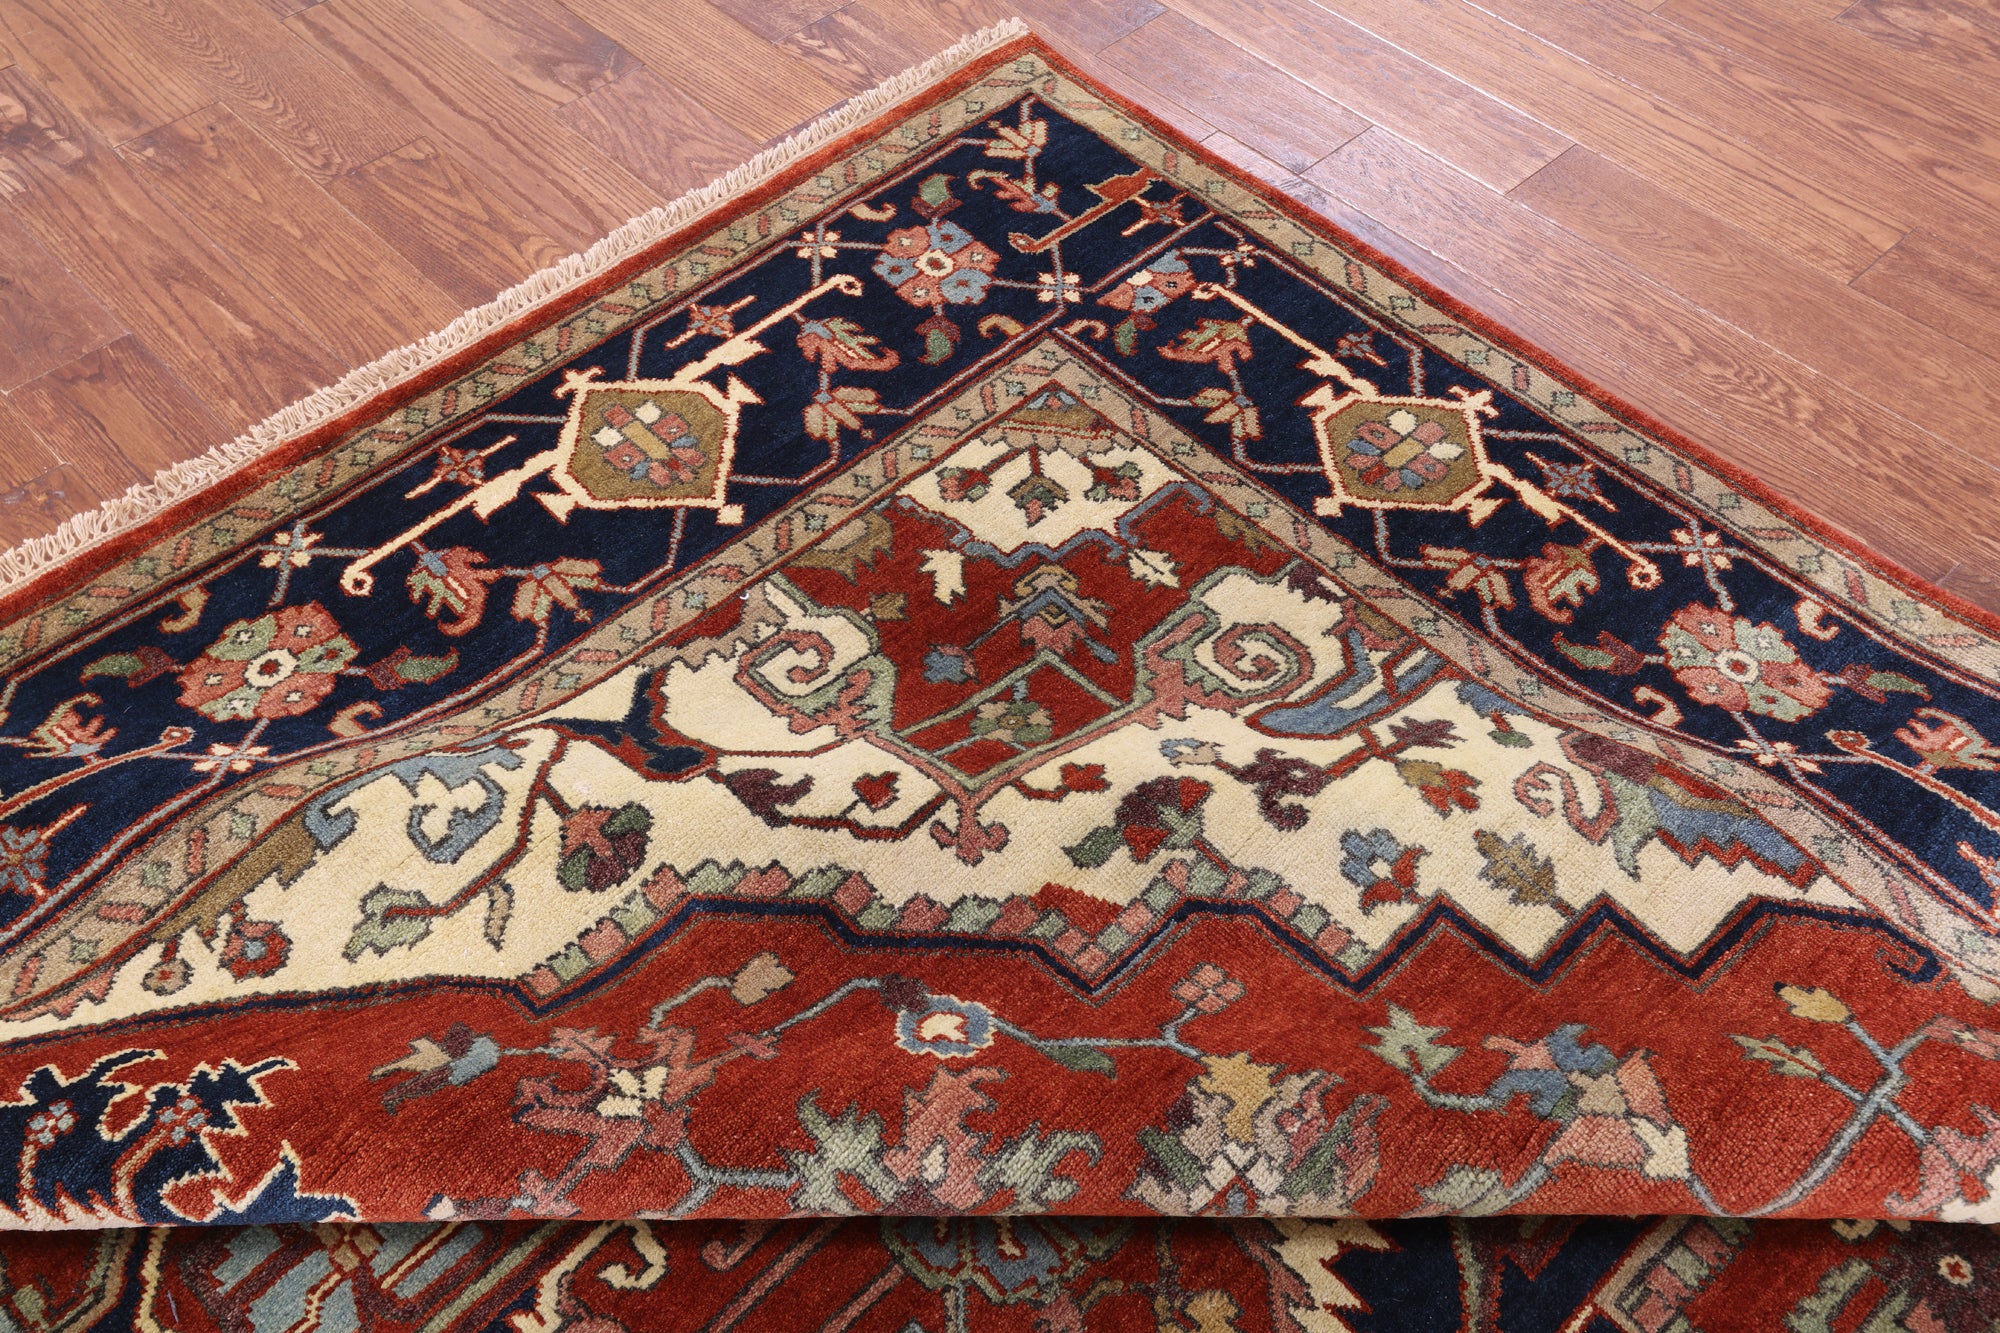 Eastern Weavers One of A Kind Hand-Knotted Persian 3' x 5' Oriental Wool Cream Rug - 4'0x3'0